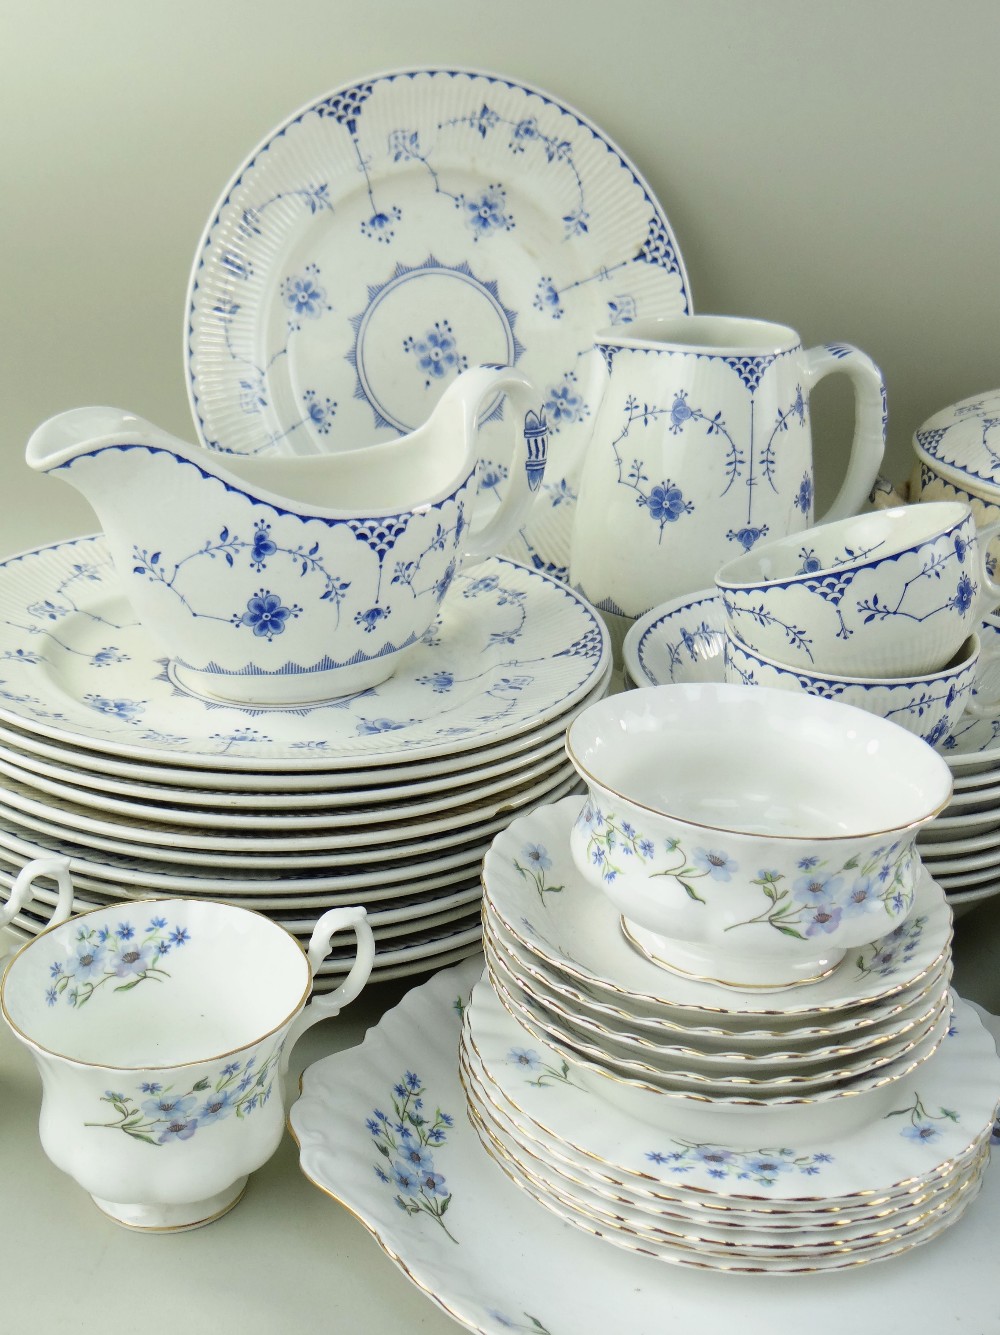 MATCHED PART SERVICE OF 'DENMARK' PATTERN BLUE & WHITE DINNERWARES, mainly by Furnivals Ltd., - Image 5 of 20